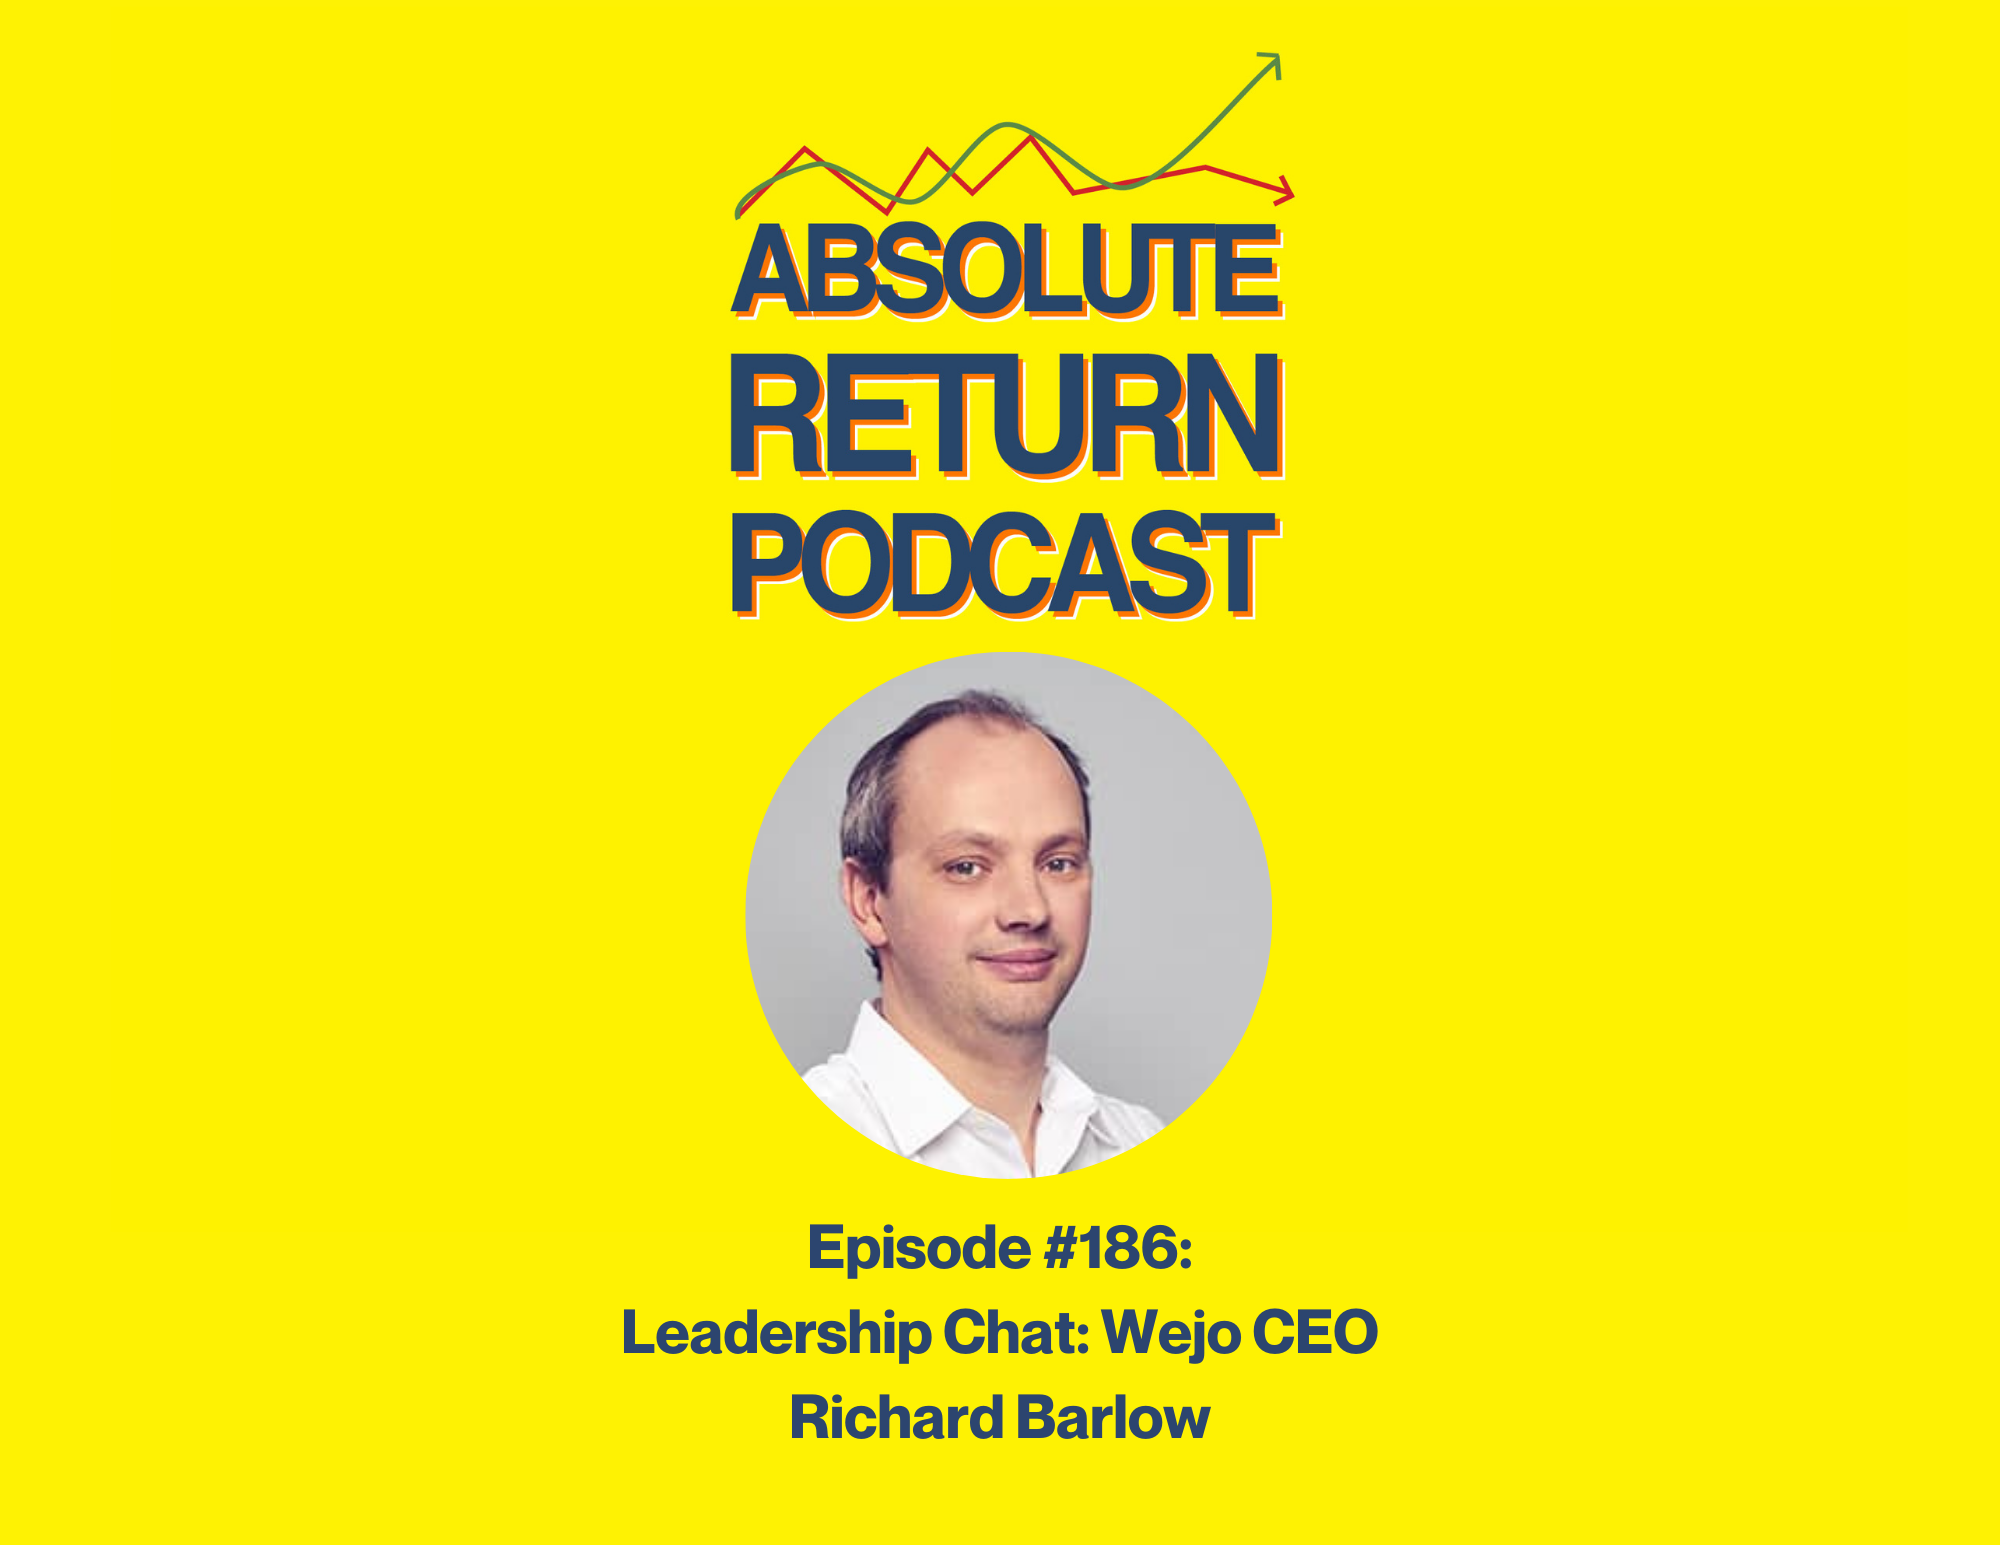 Absolute Return Podcast #186: Leadership Chat: Wejo CEO Richard Barlow